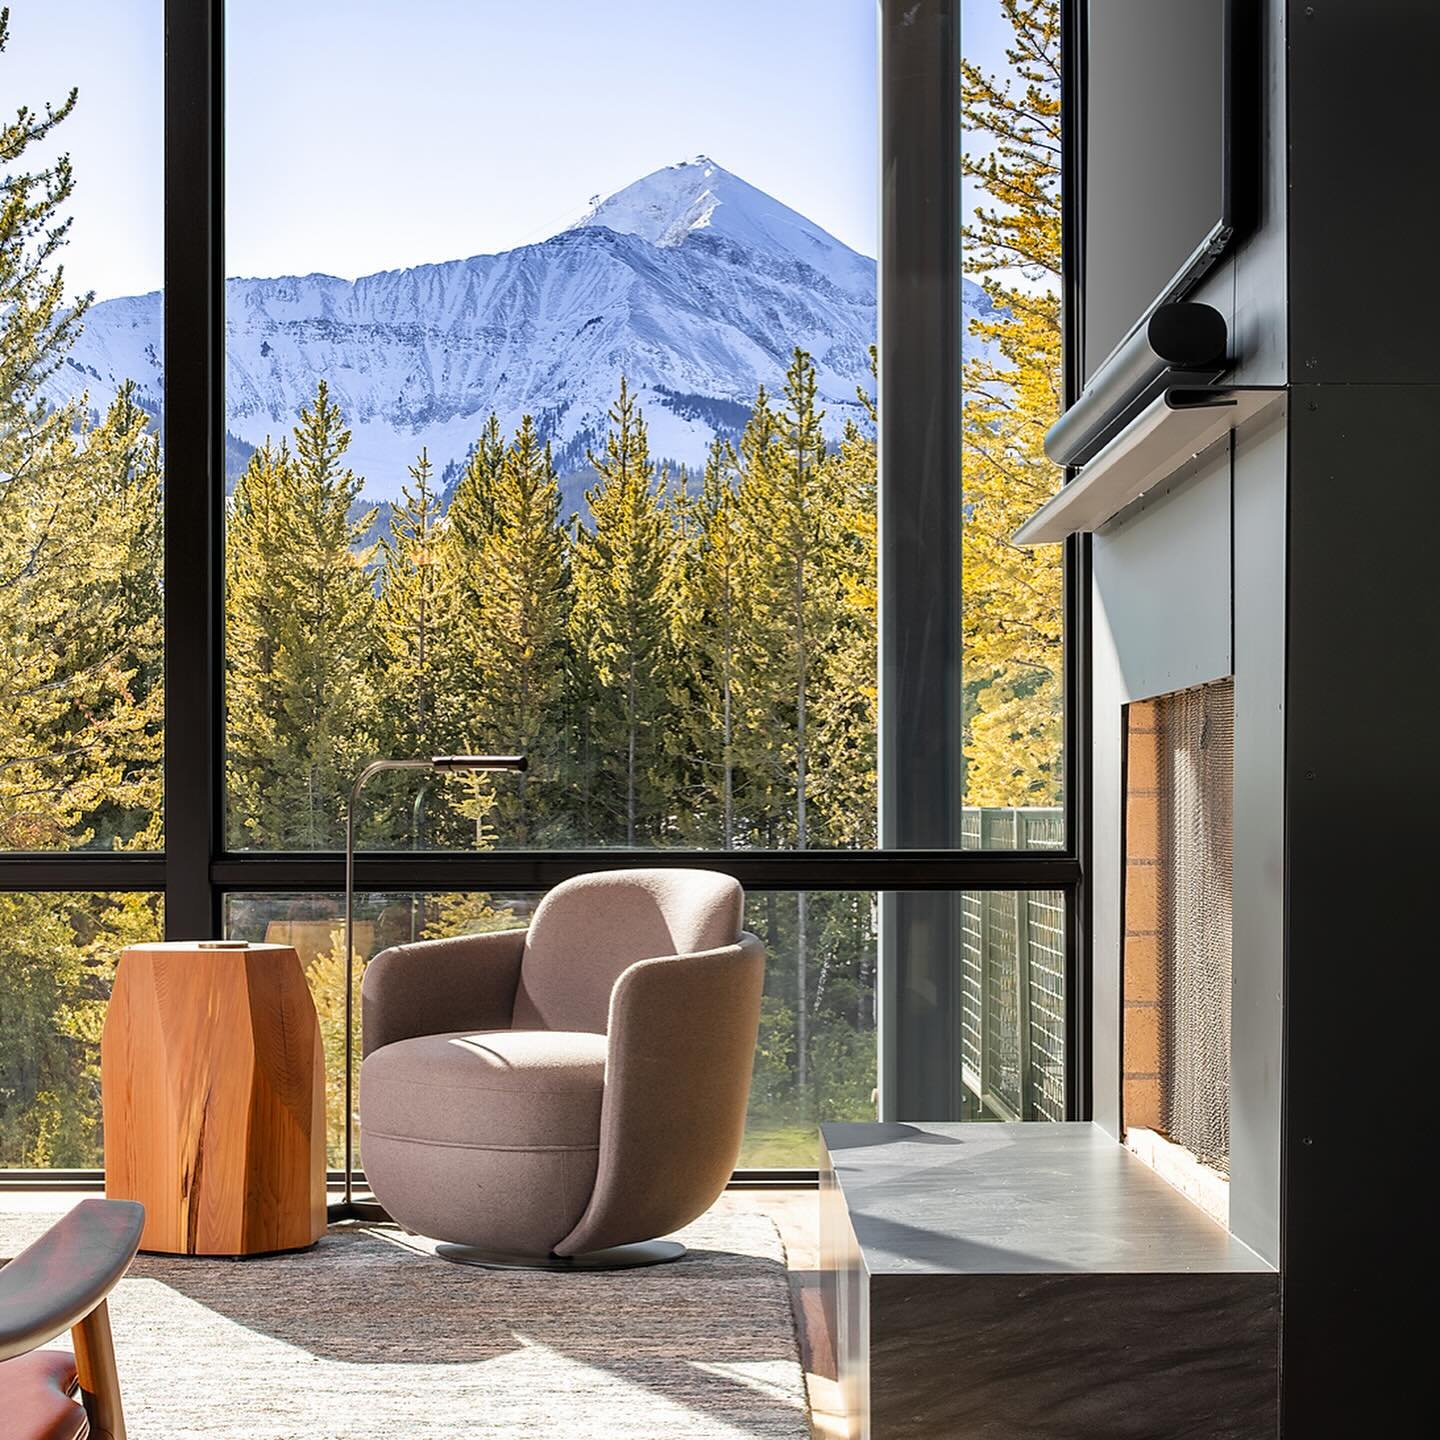 M&eacute;tier Maison Monday | Big Sky, Montana

Situated in the untamed wilderness of Montana, this One&amp;Only Moonlight Basin Private Home offers beautifully designed spaces, all blending in seamlessly with this remarkable landscape of forests and